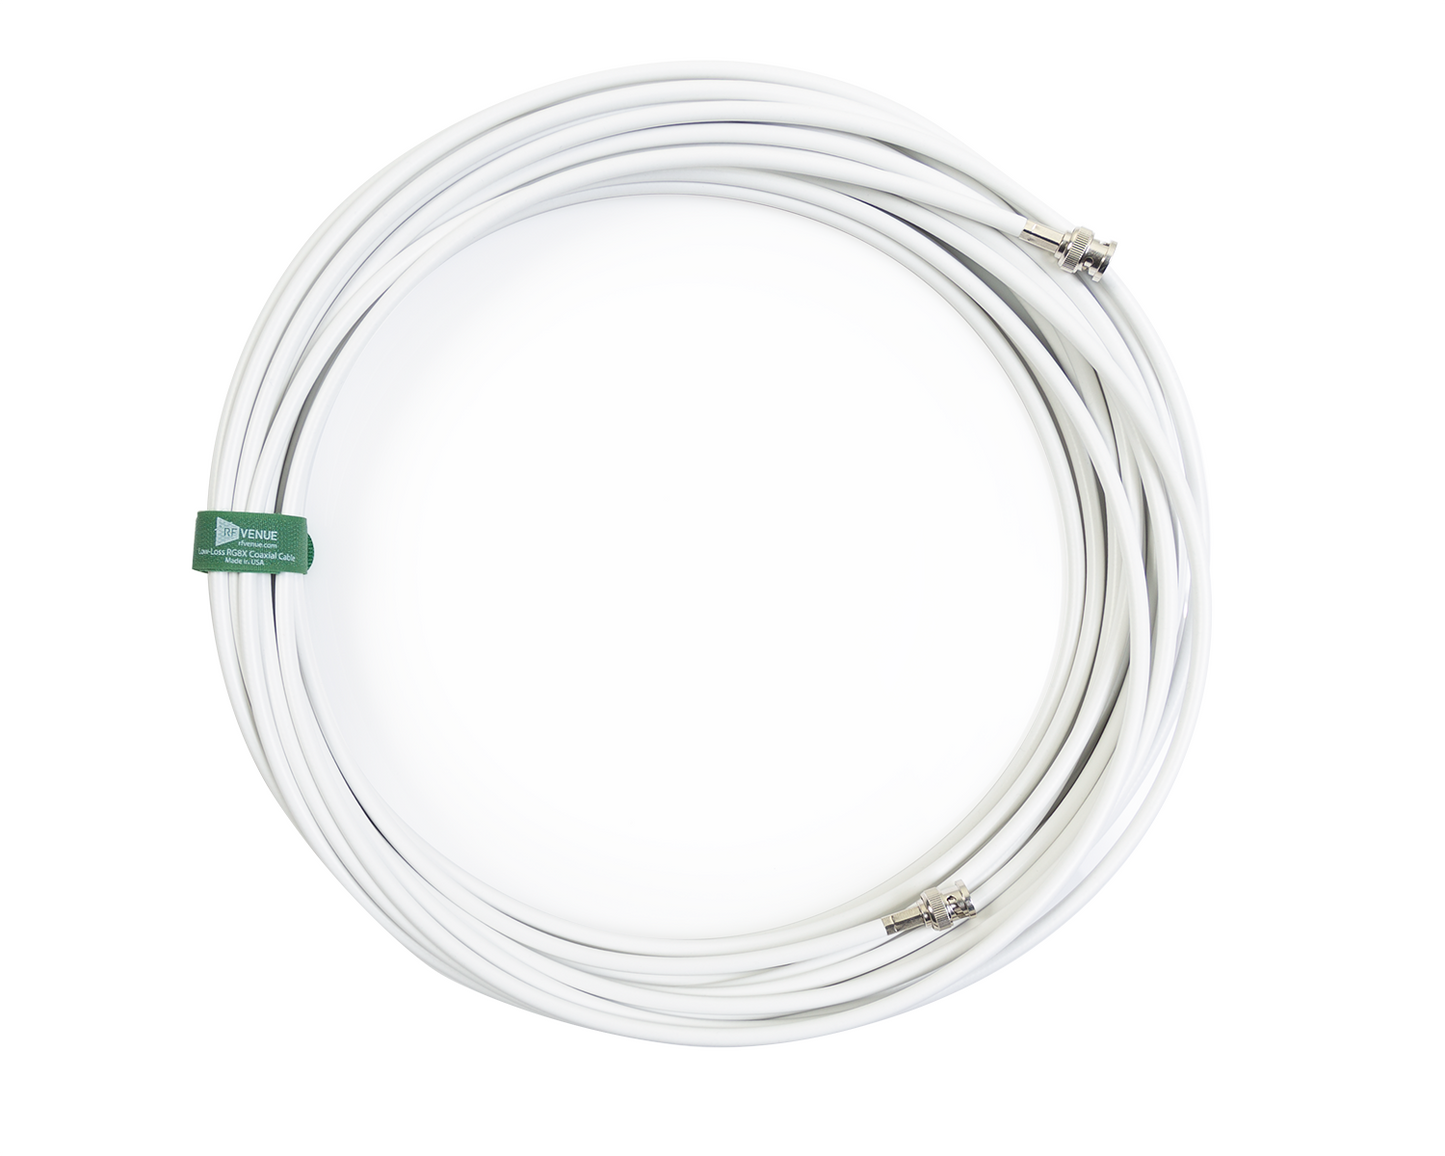 RG8X Coaxial Cable